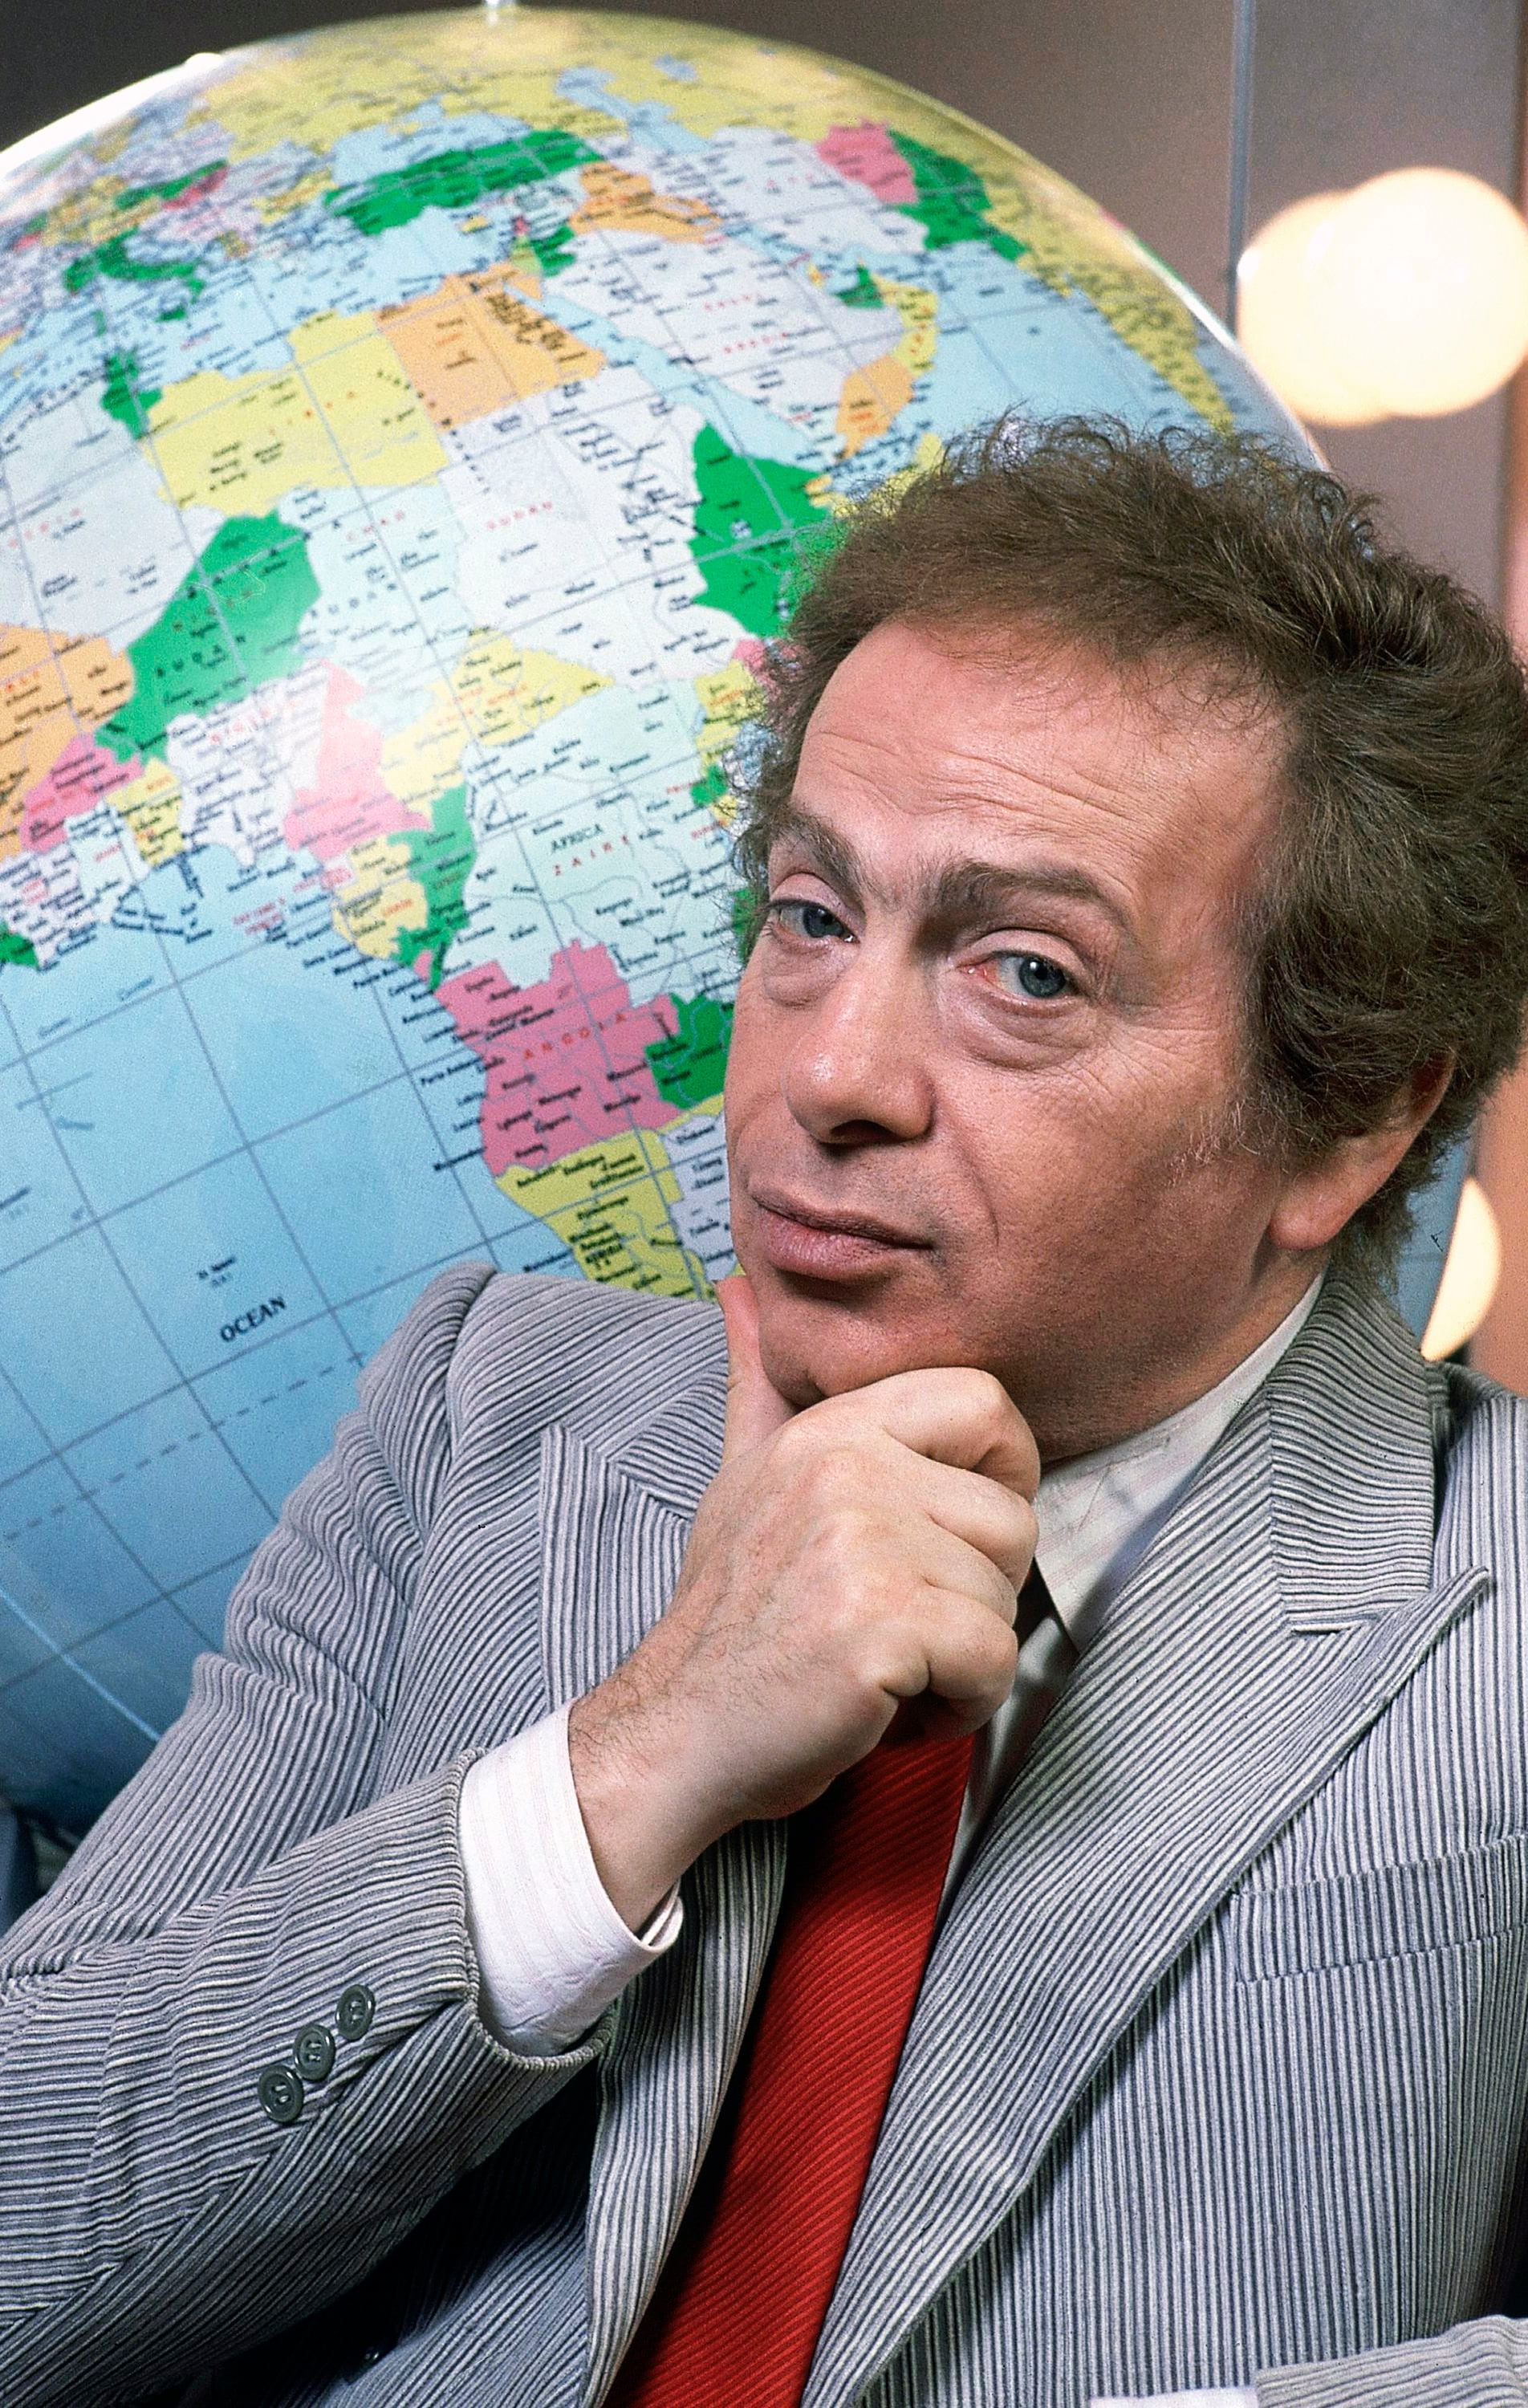 Jackie Mason, comic who perfected amused outrage, dies at 93